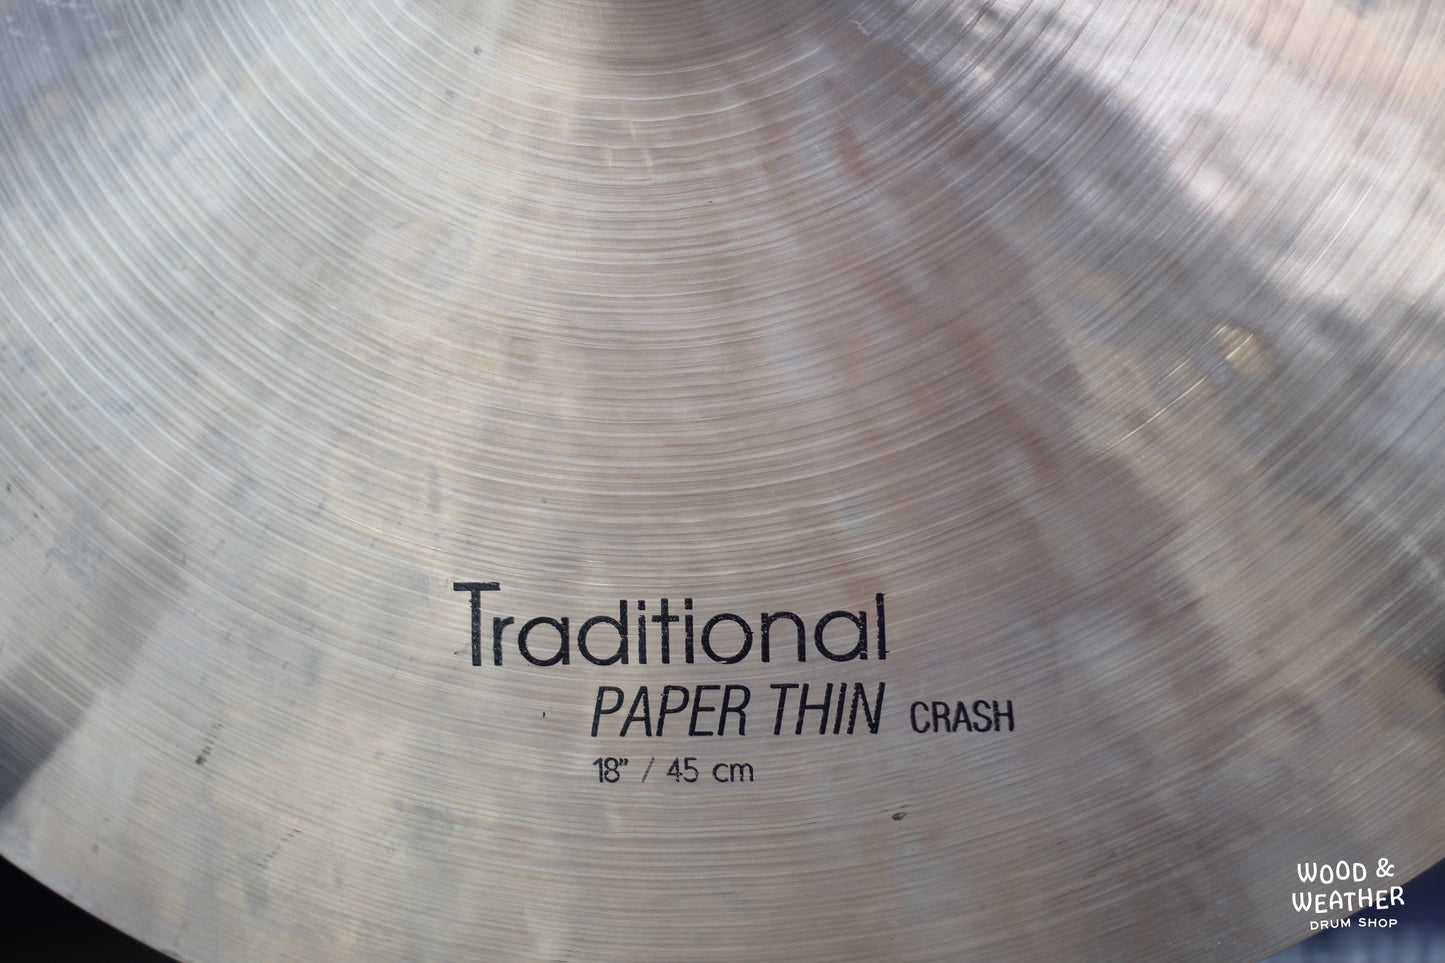 Used Istanbul Agop 18" Traditional Paper Thin Crash Cymbal 1225g